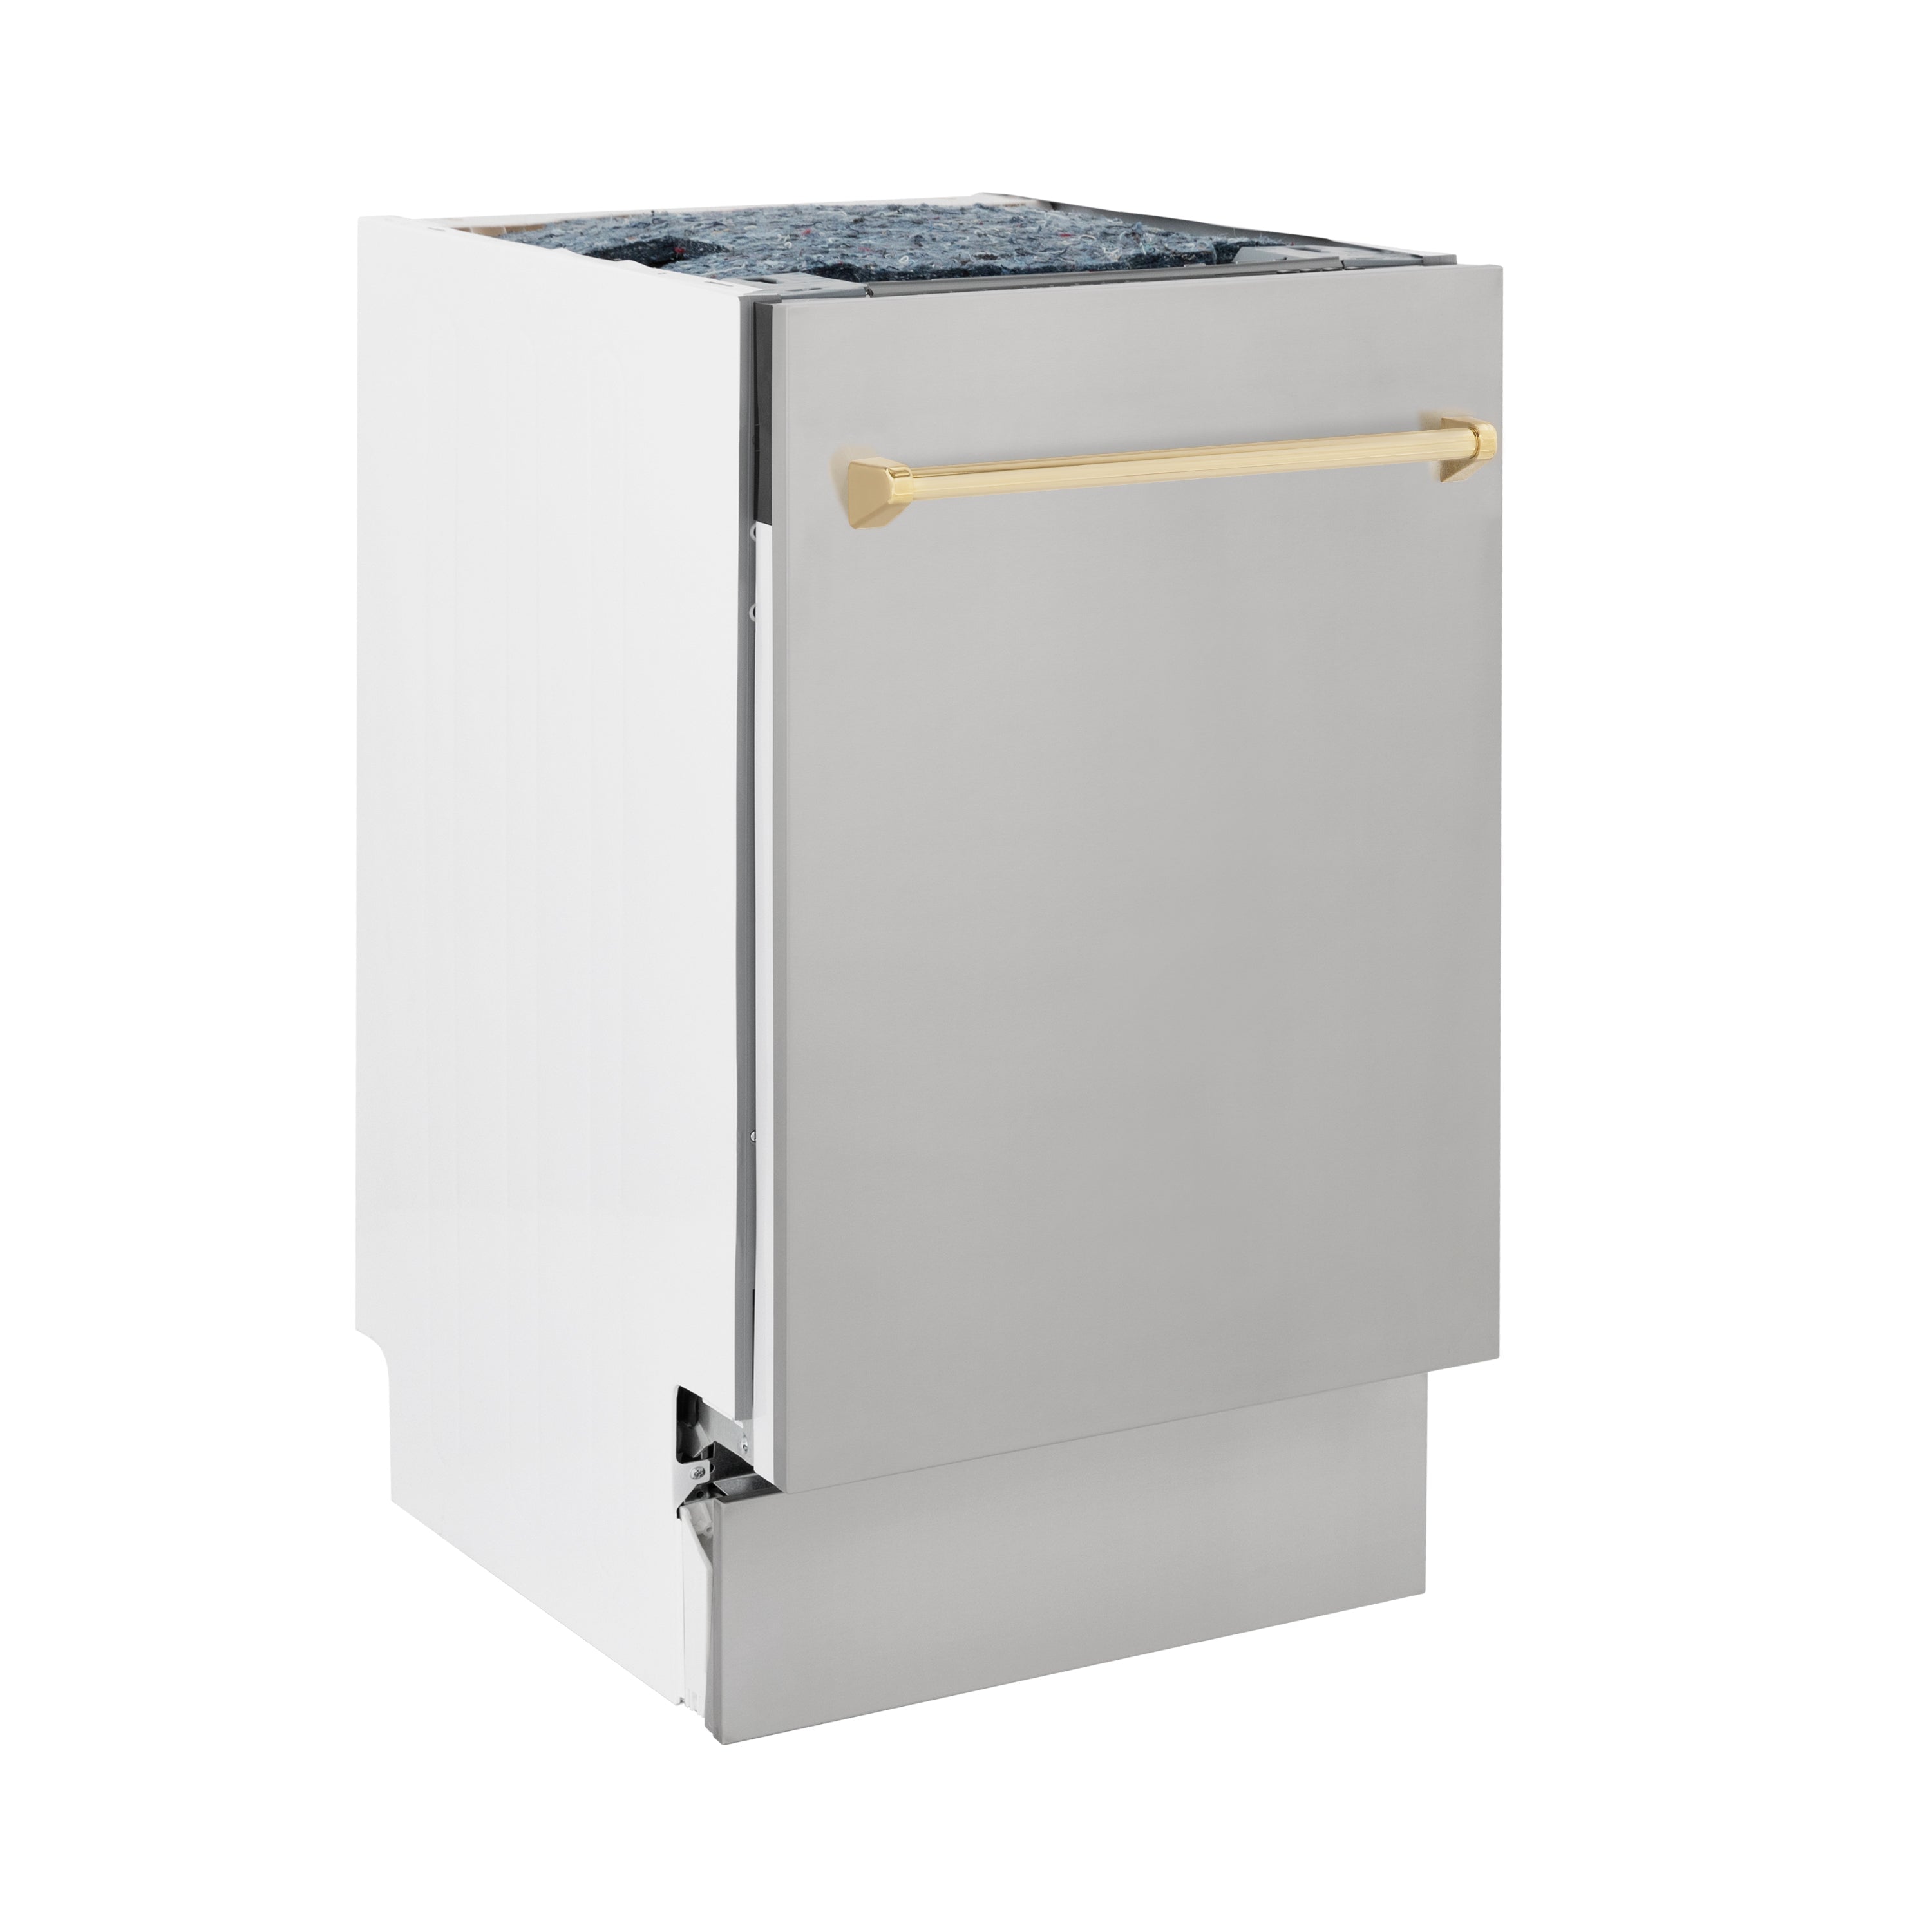 ZLINE Autograph Edition 18 in. Tallac Series 3rd Rack Top Control Built-In Dishwasher in Stainless Steel with Polished Gold Handle, 51dBa (DWVZ-304-18-G) front, closed.